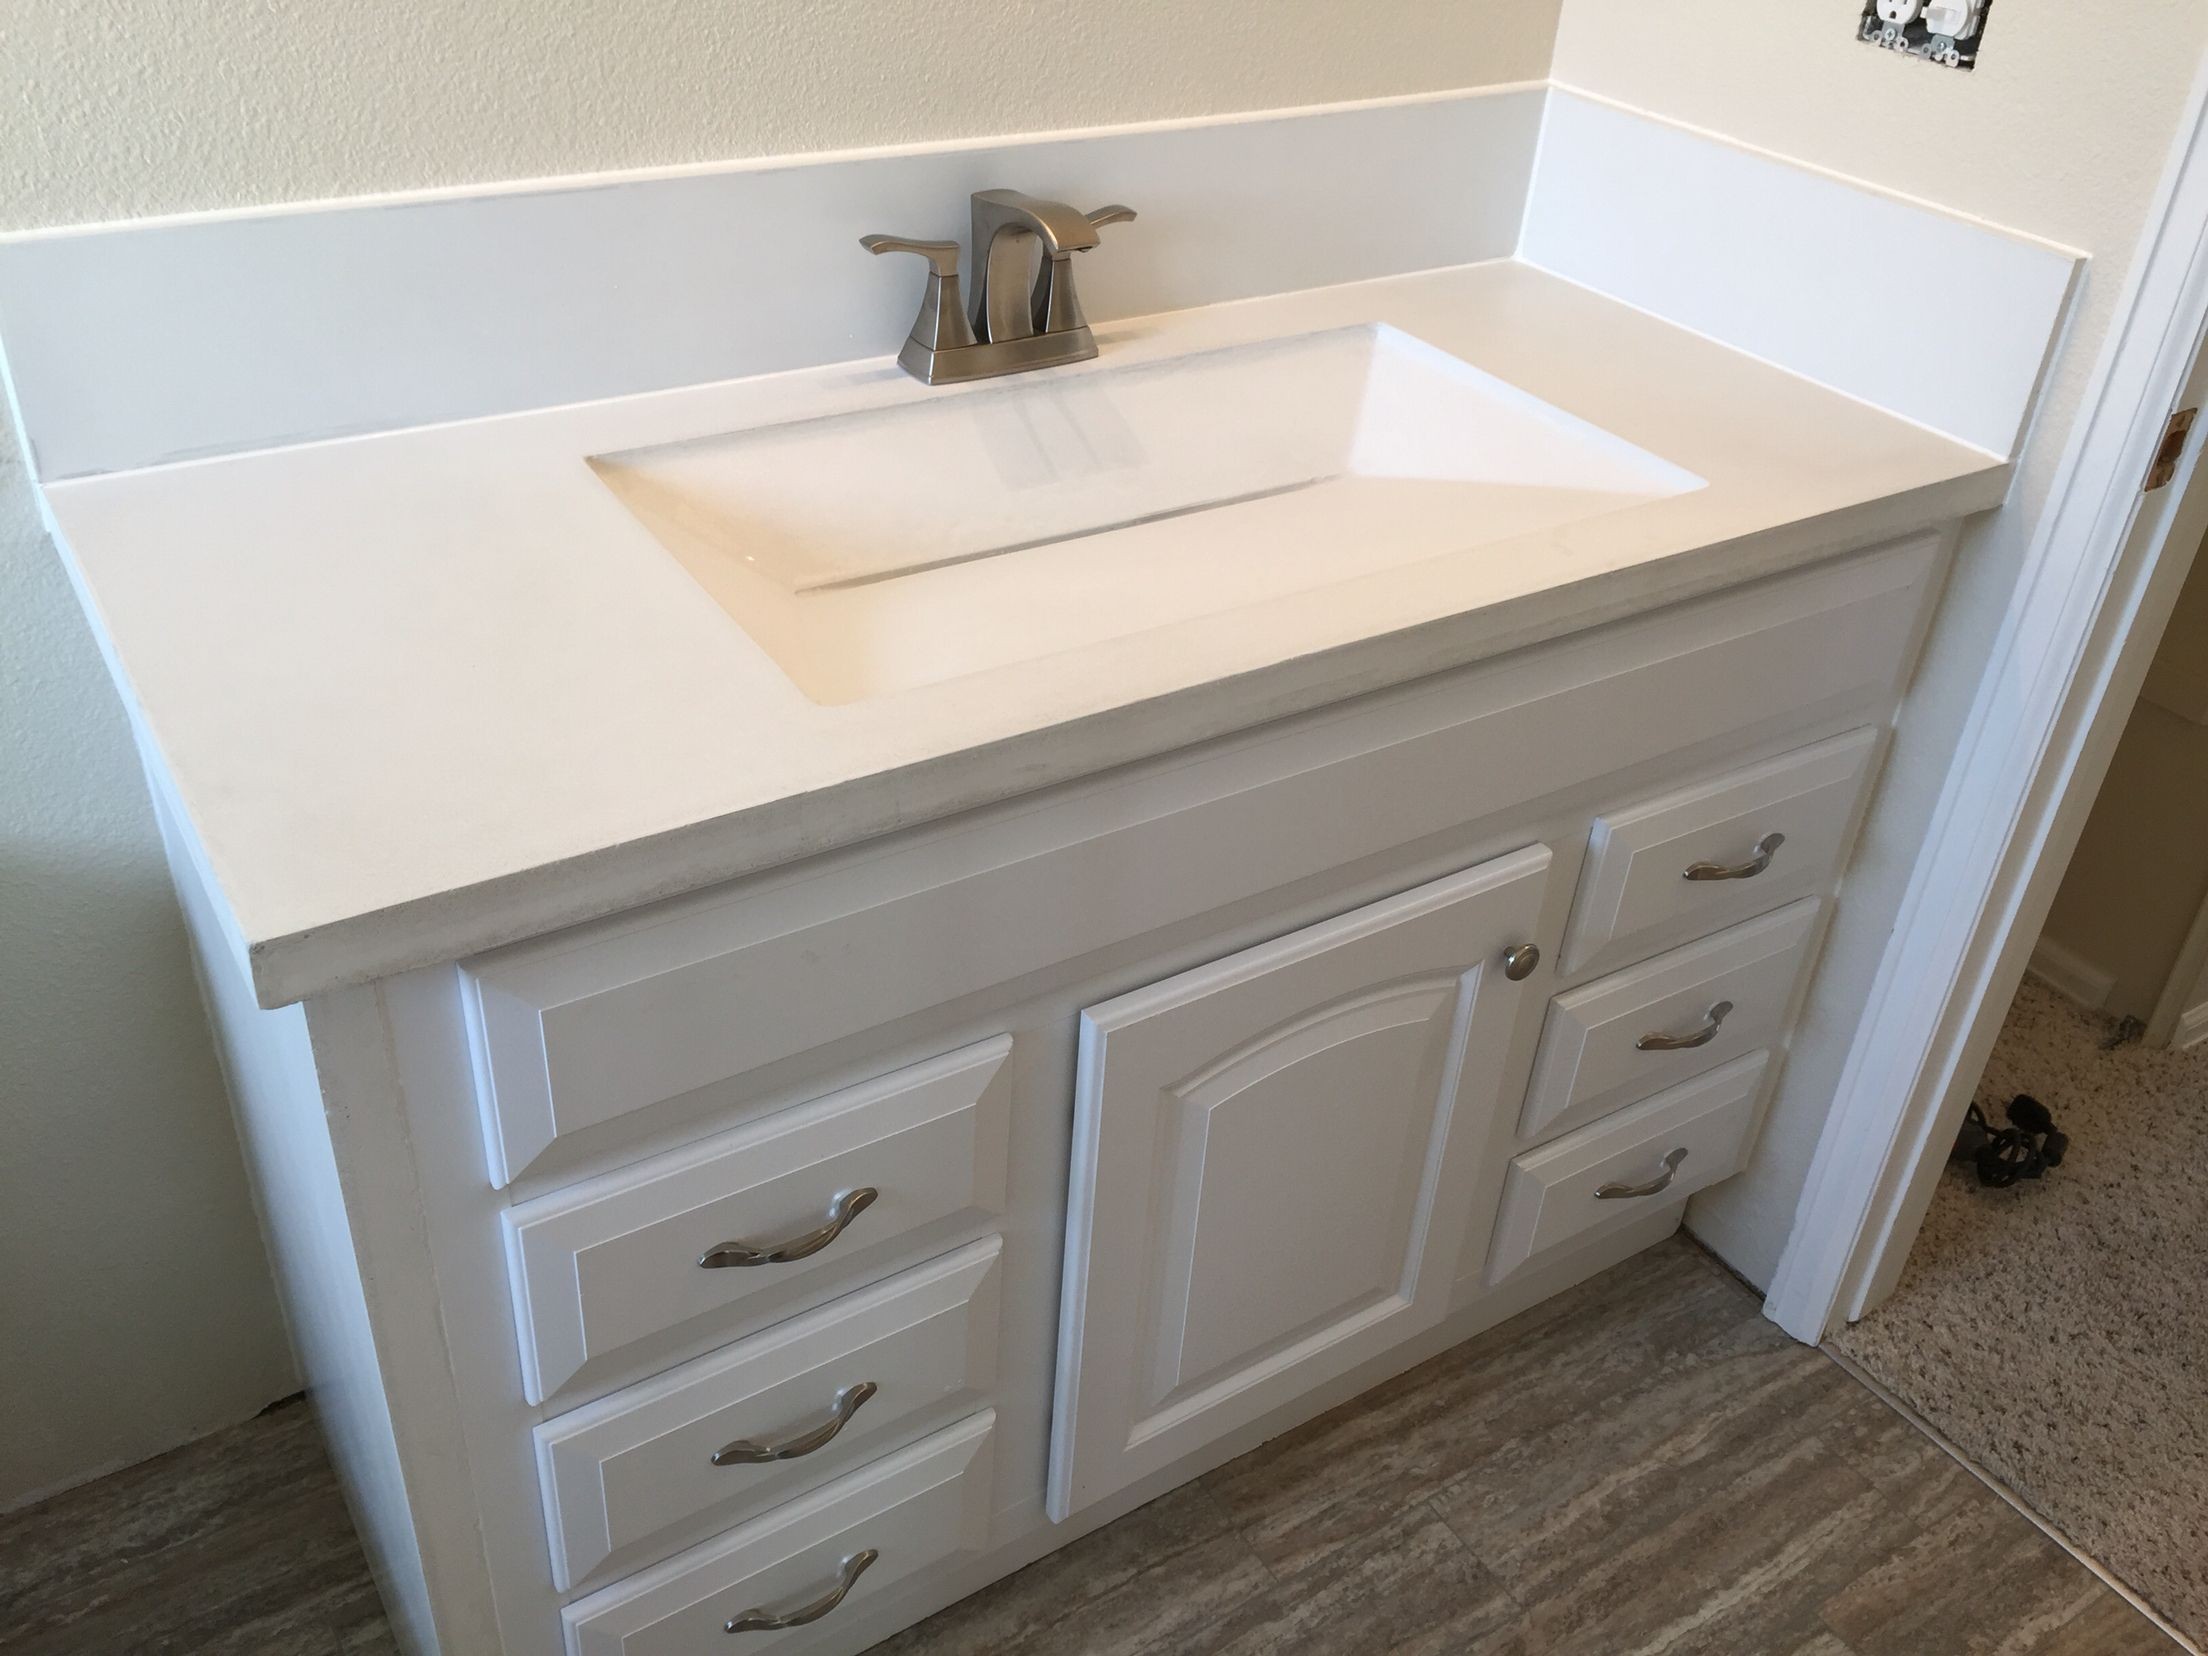 Bathroom Countertop With Integrated Sink Why Is Everyone Talking About ...